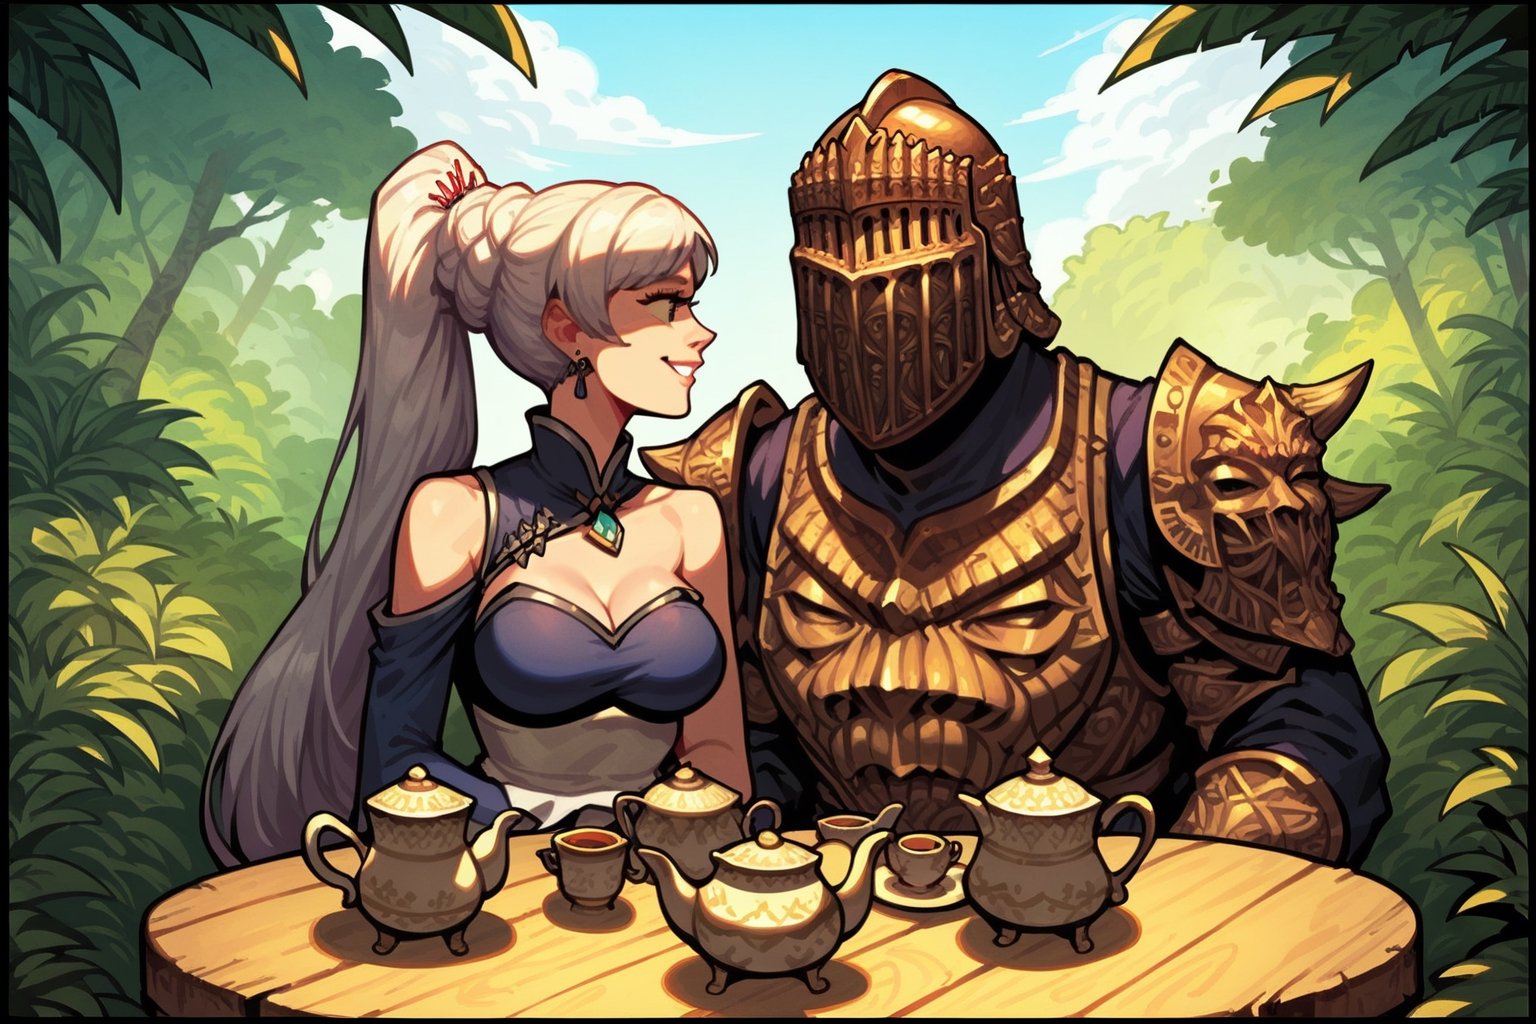 score_9, score_8, score_7, score_8_up, 1boy\(human, dark skin, giant, tall, wearing full madness Armor and helmet\) with woman\(medium breasts, Weiss Schnee wearing dress, happy, seductive\), both sitting and eating. (Tea cups, tea pot, parmesan on the table), jungle, both staring at each other, score_7_up, side view